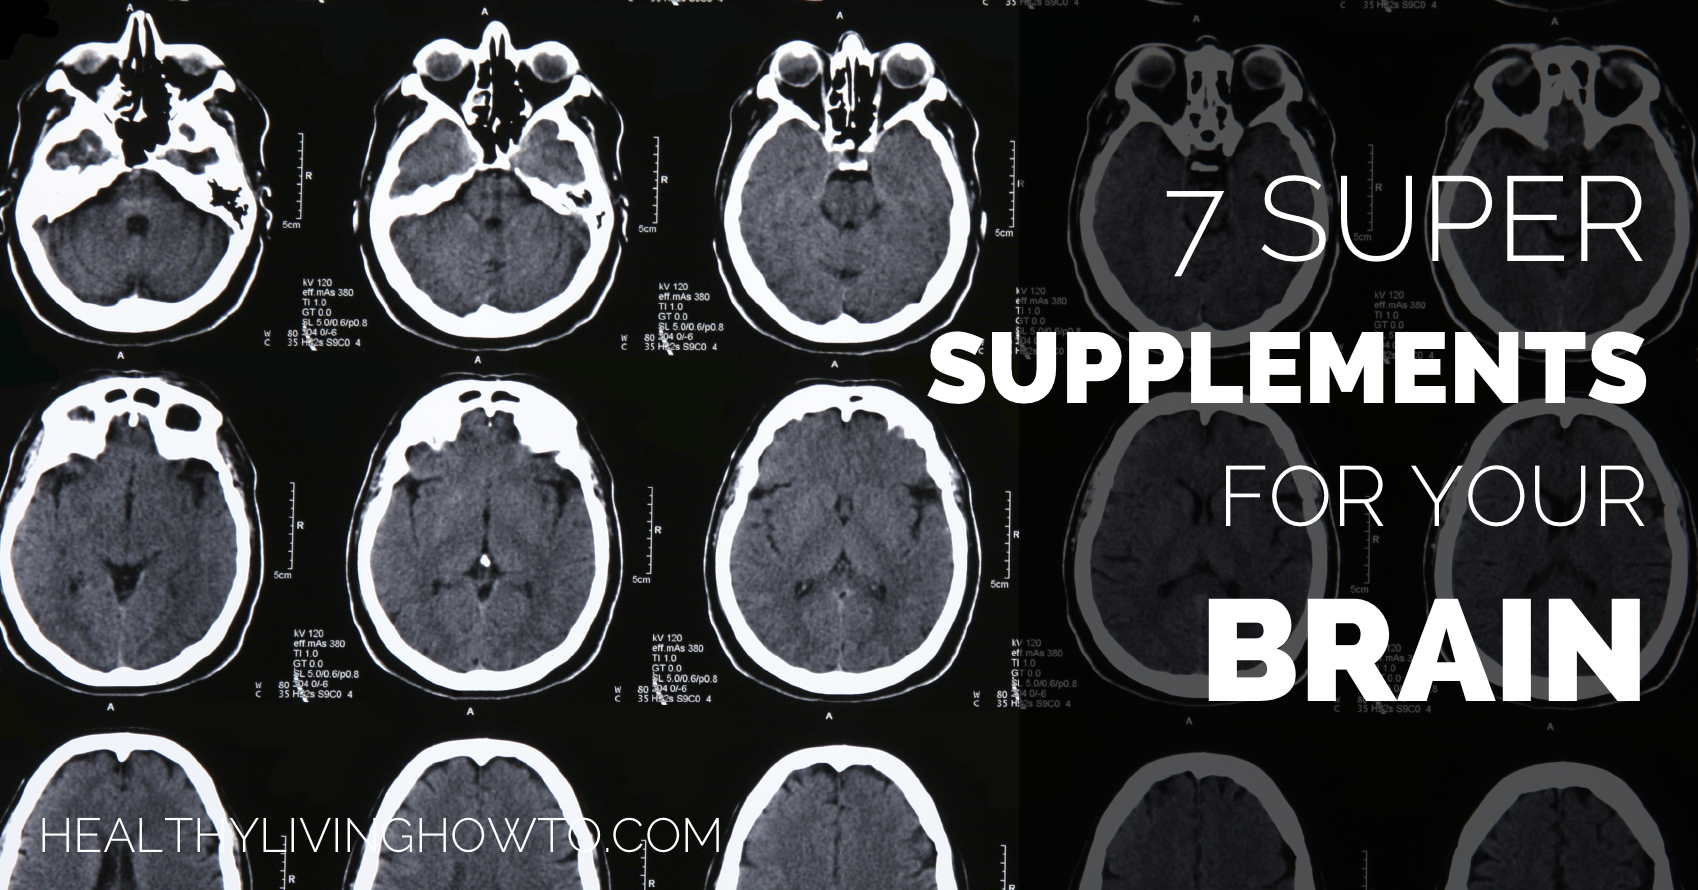 7 Super Supplements for Your Brain | healtylivinghowto.com